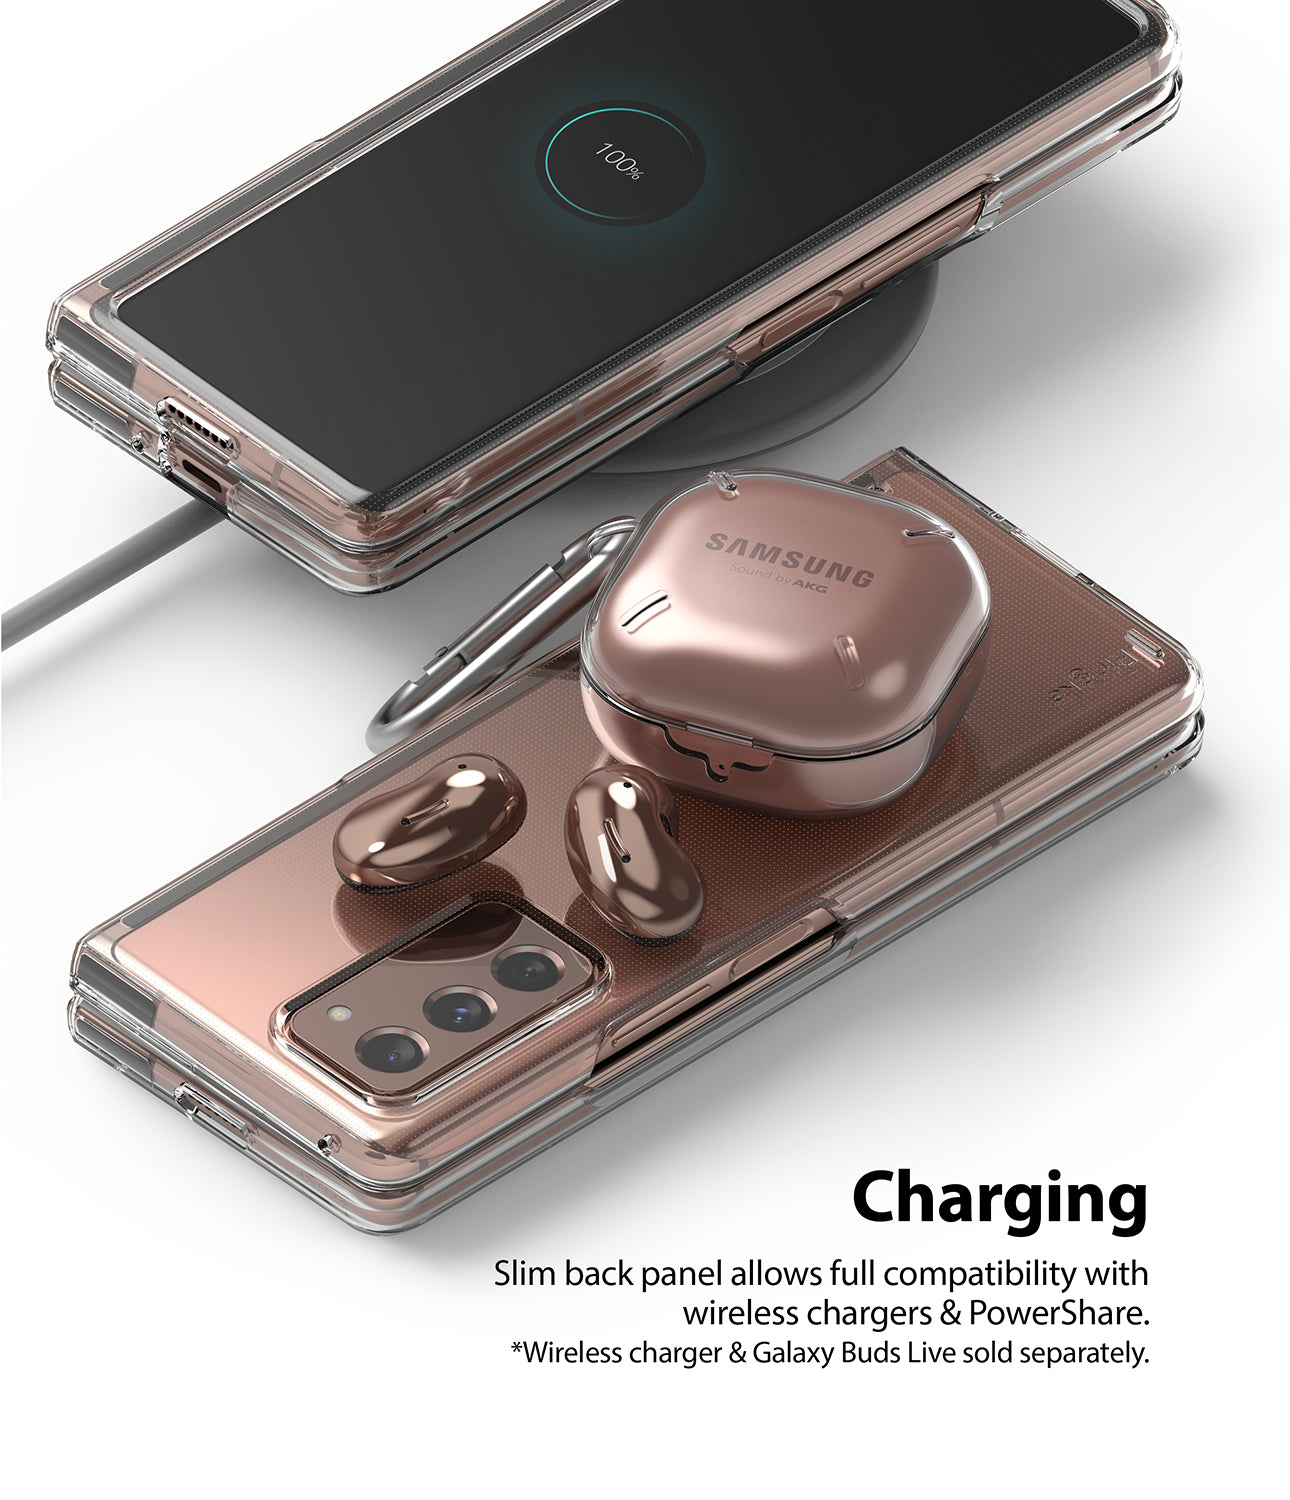 slim back panel allows wireless charging and power share